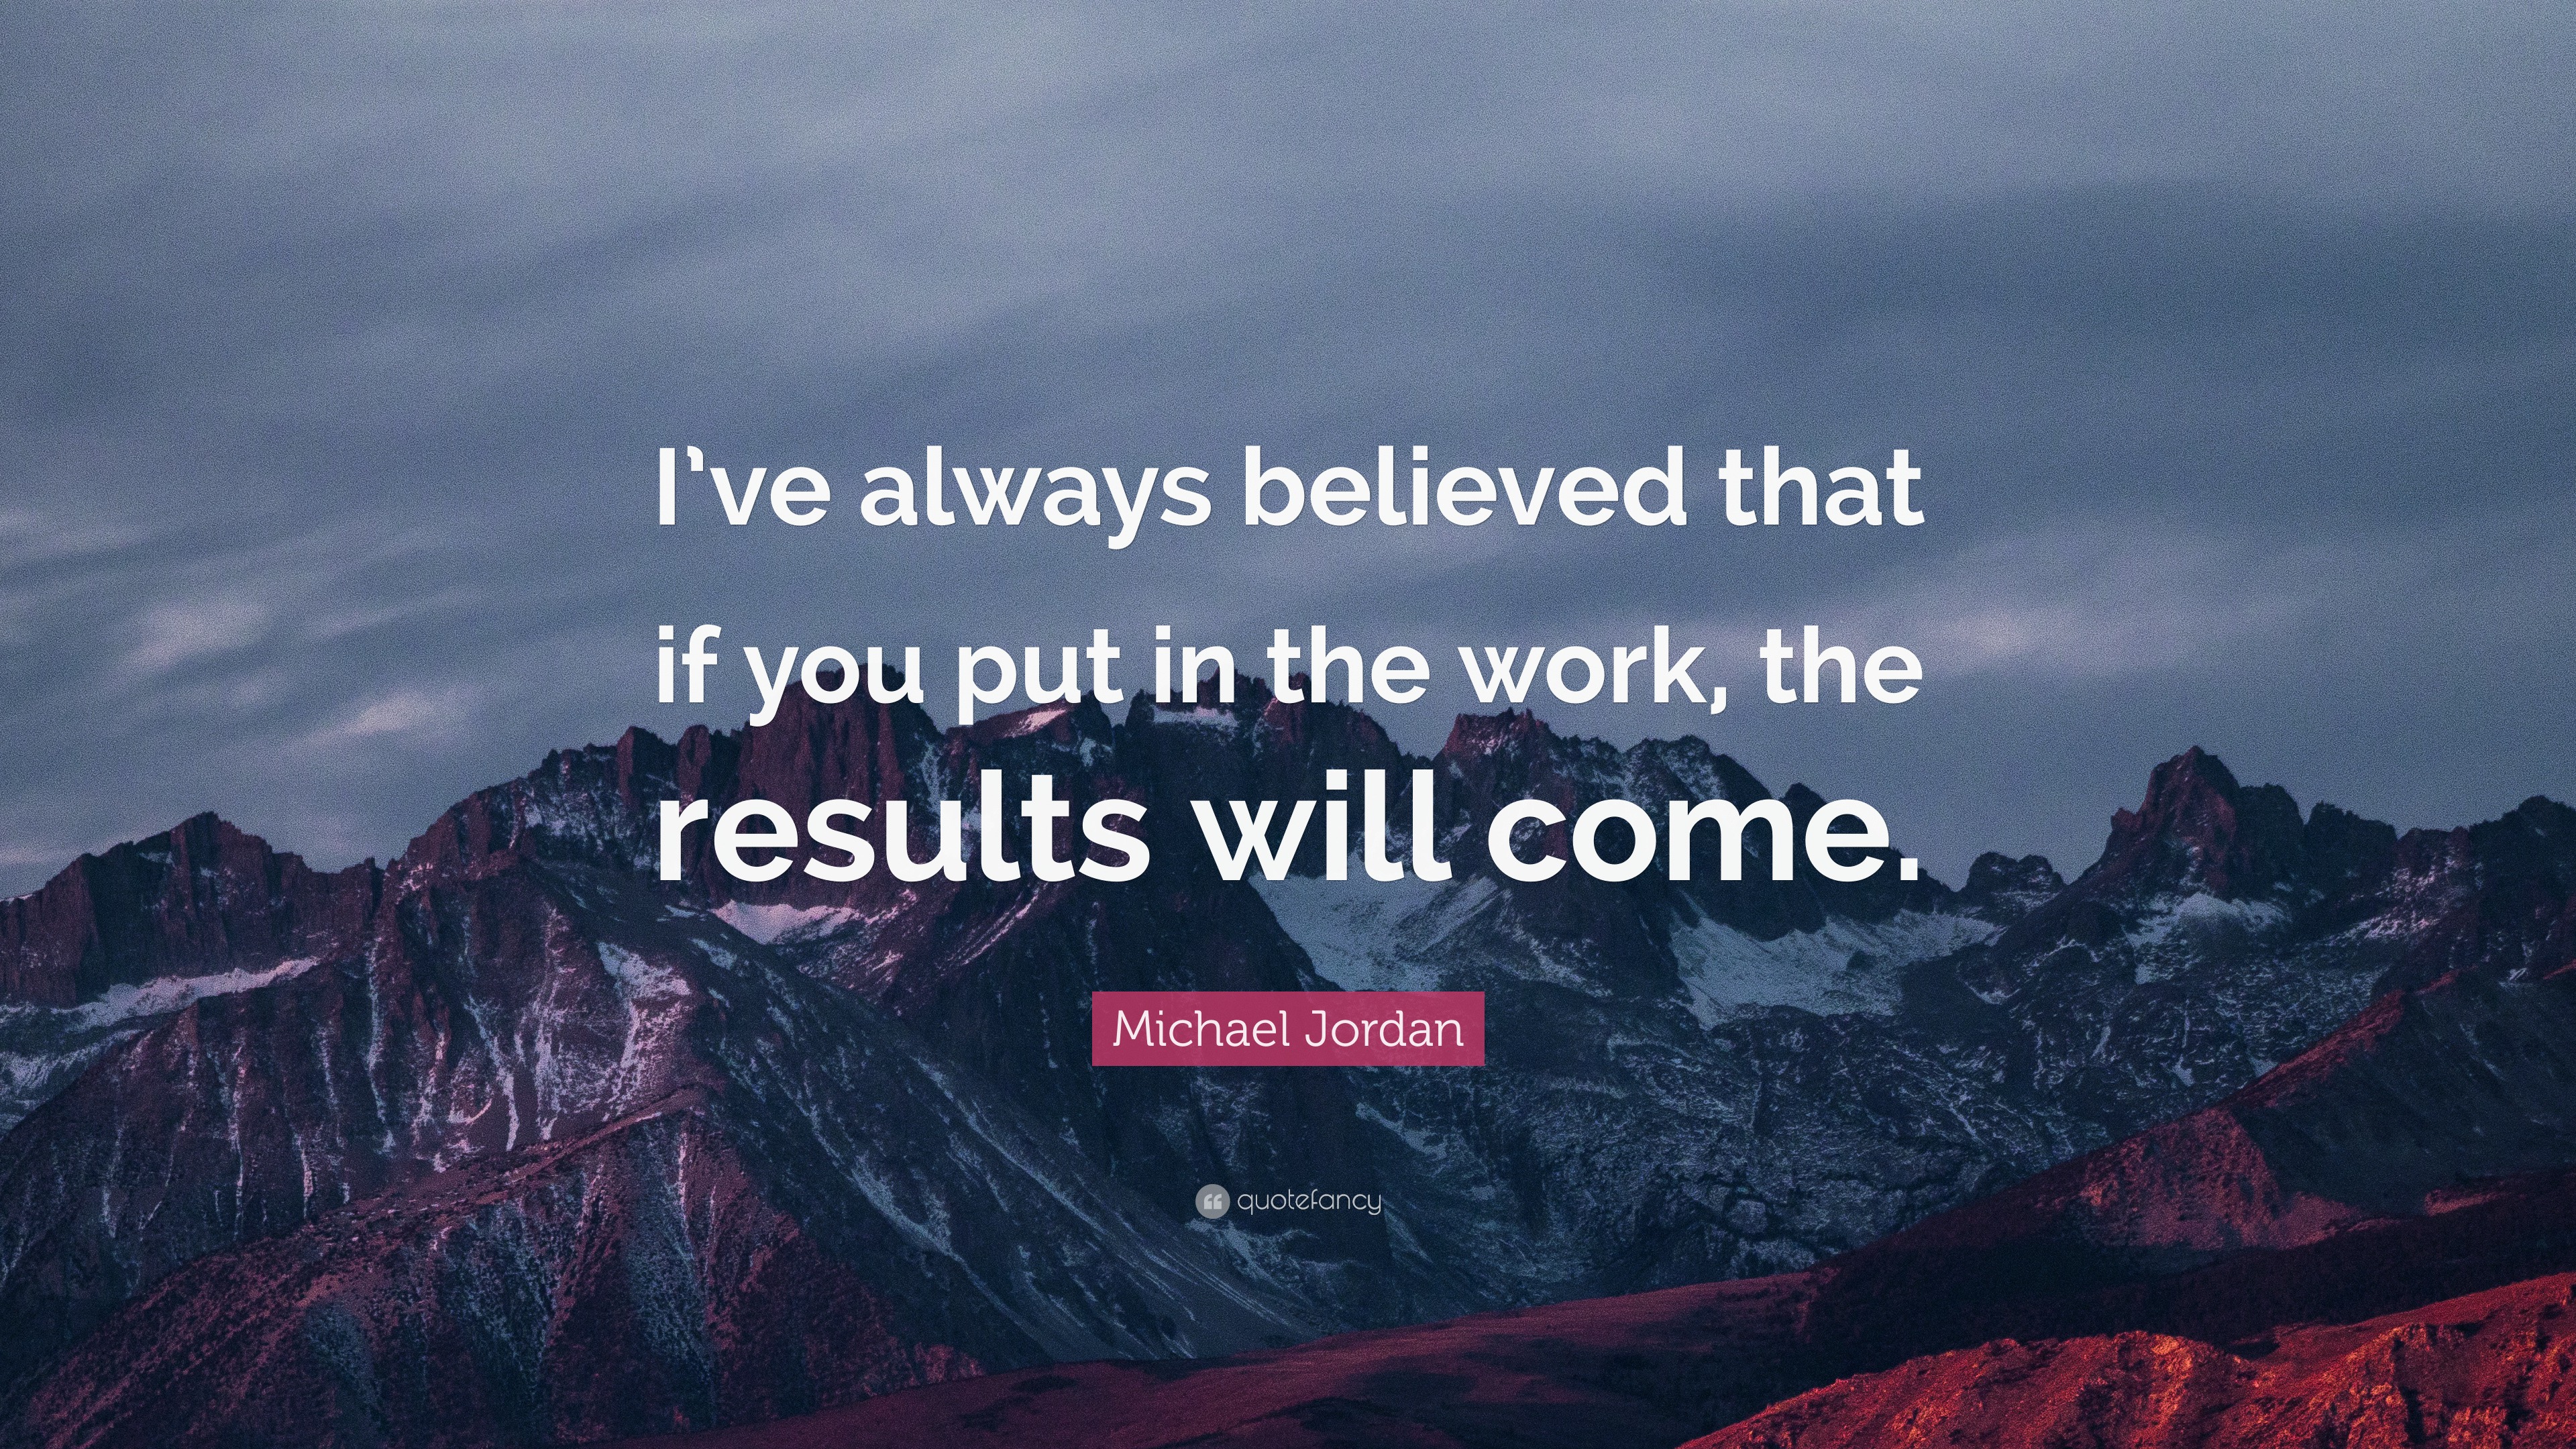 Michael Jordan Quote: “I’ve always believed that if you put in the work